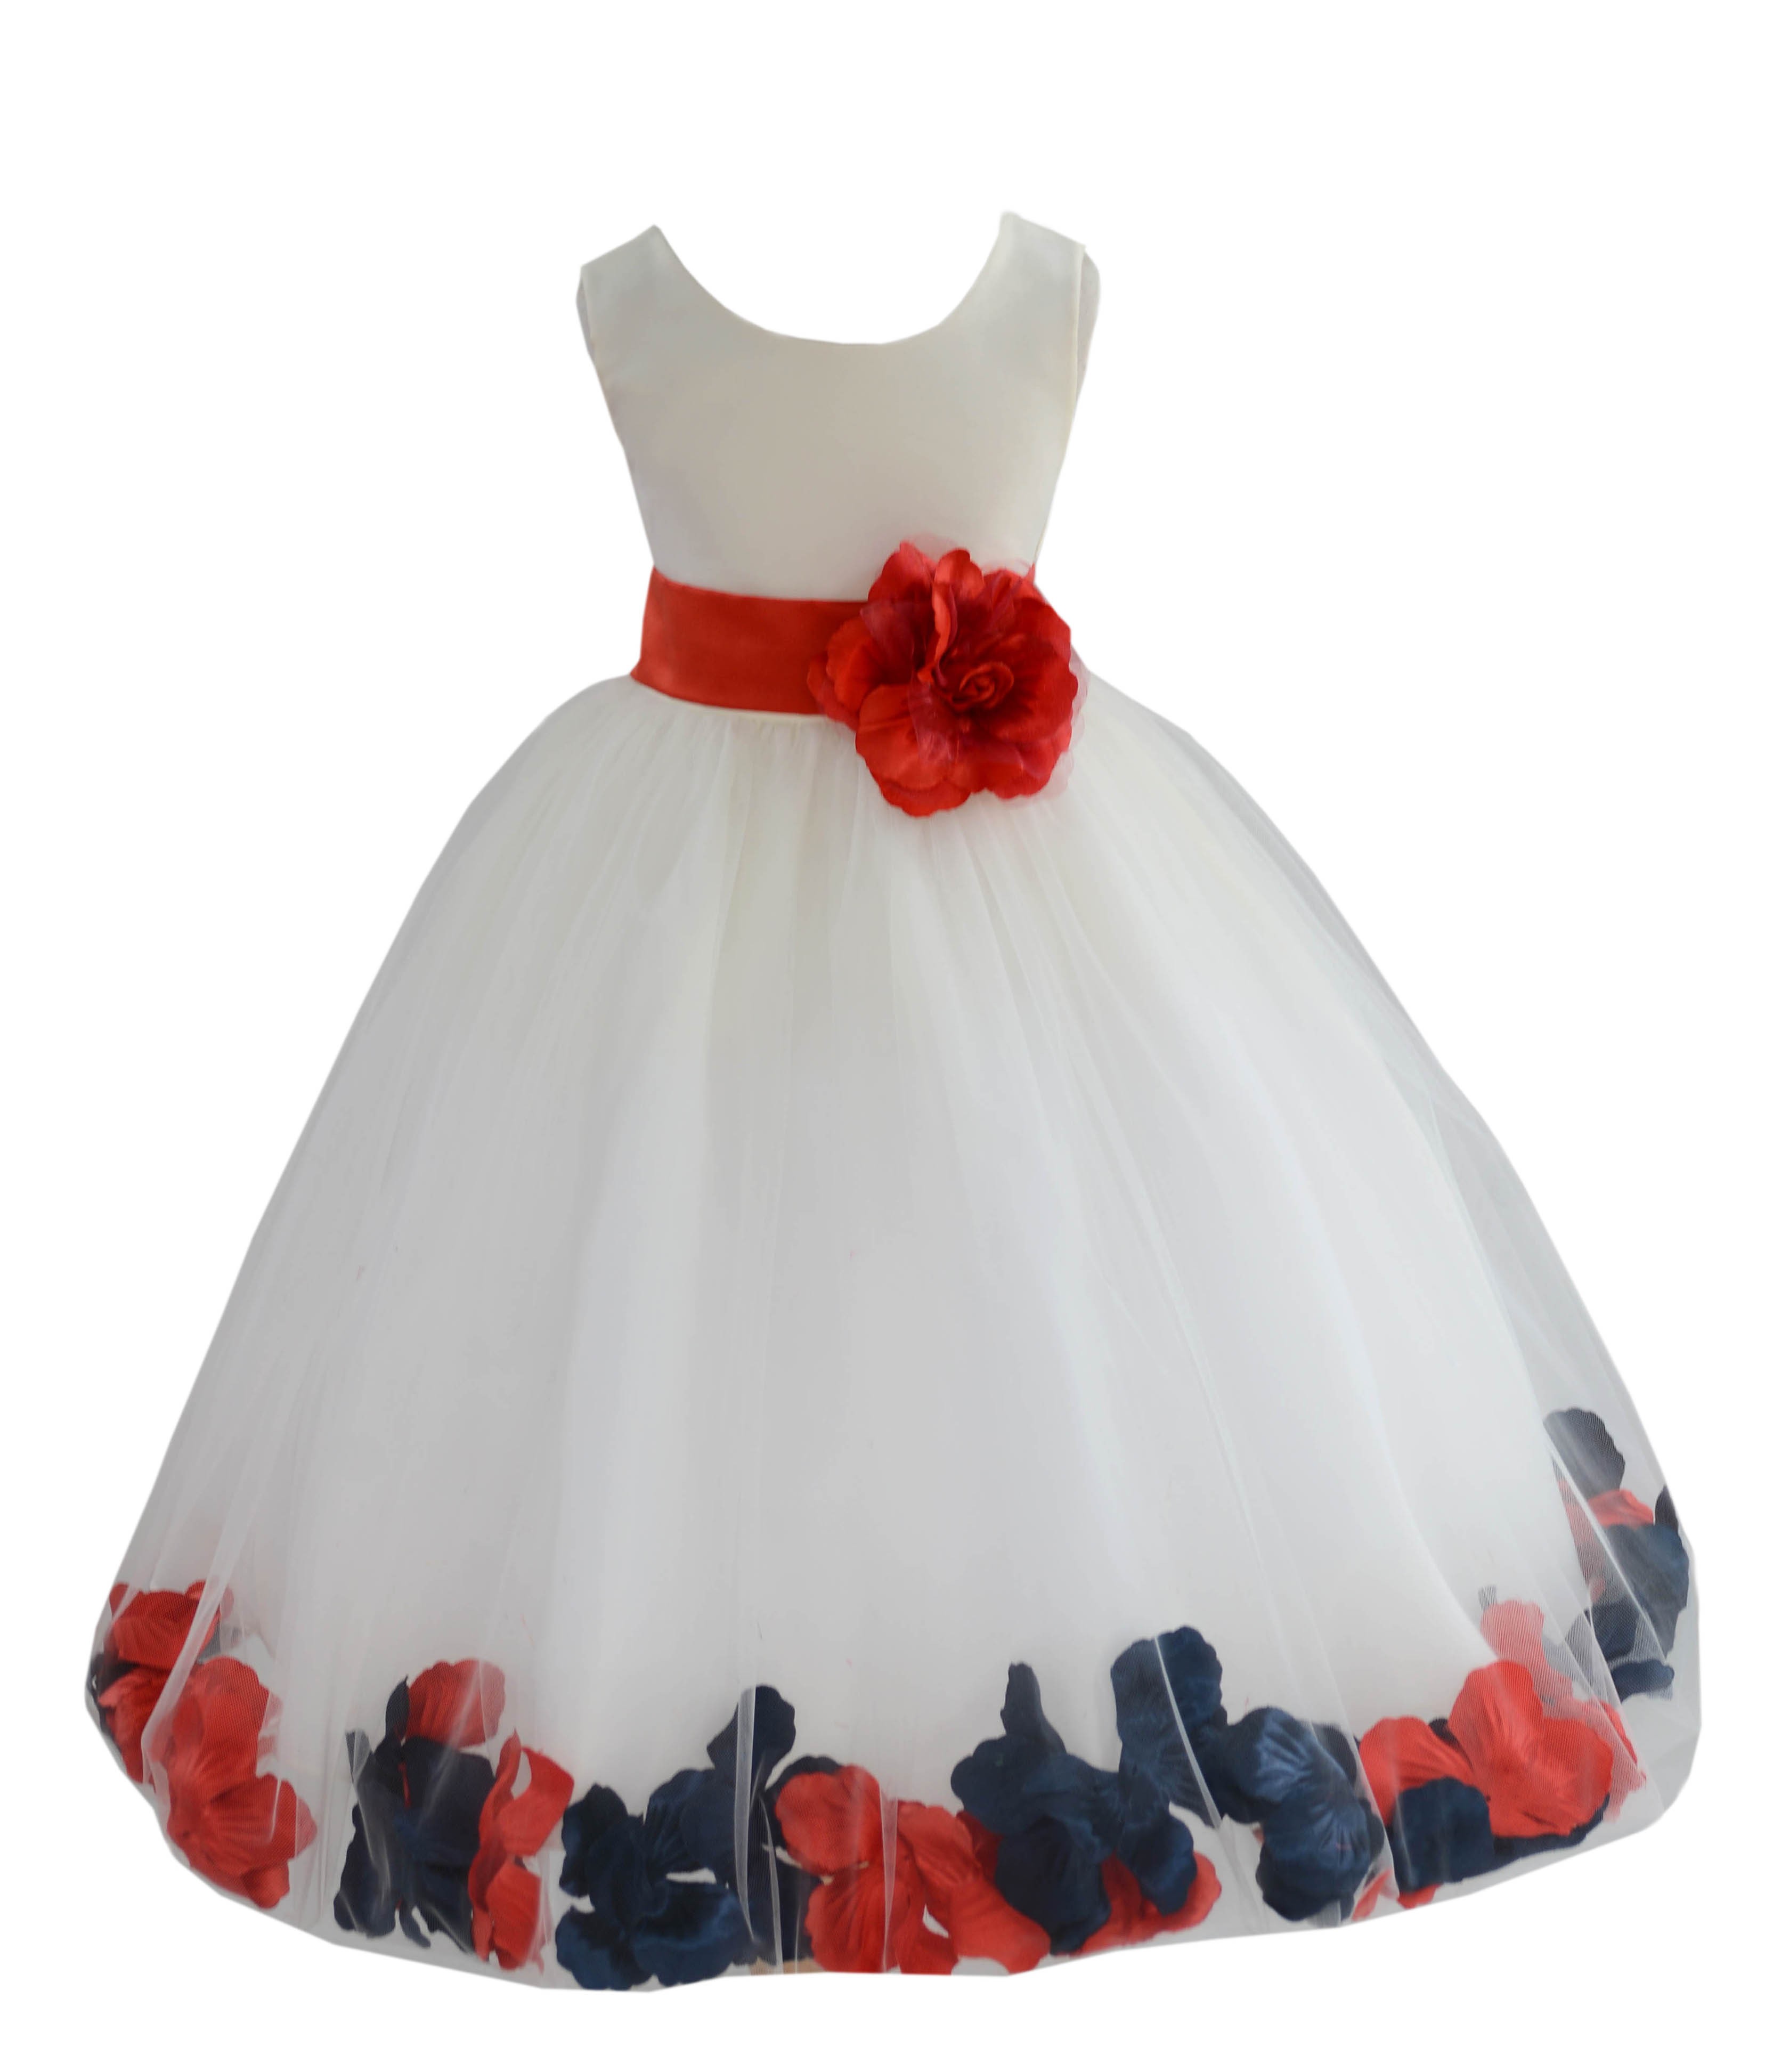 Ivory/Persimmon-Peacock Tulle Mixed Rose Petals Flower Girl Dress 302T